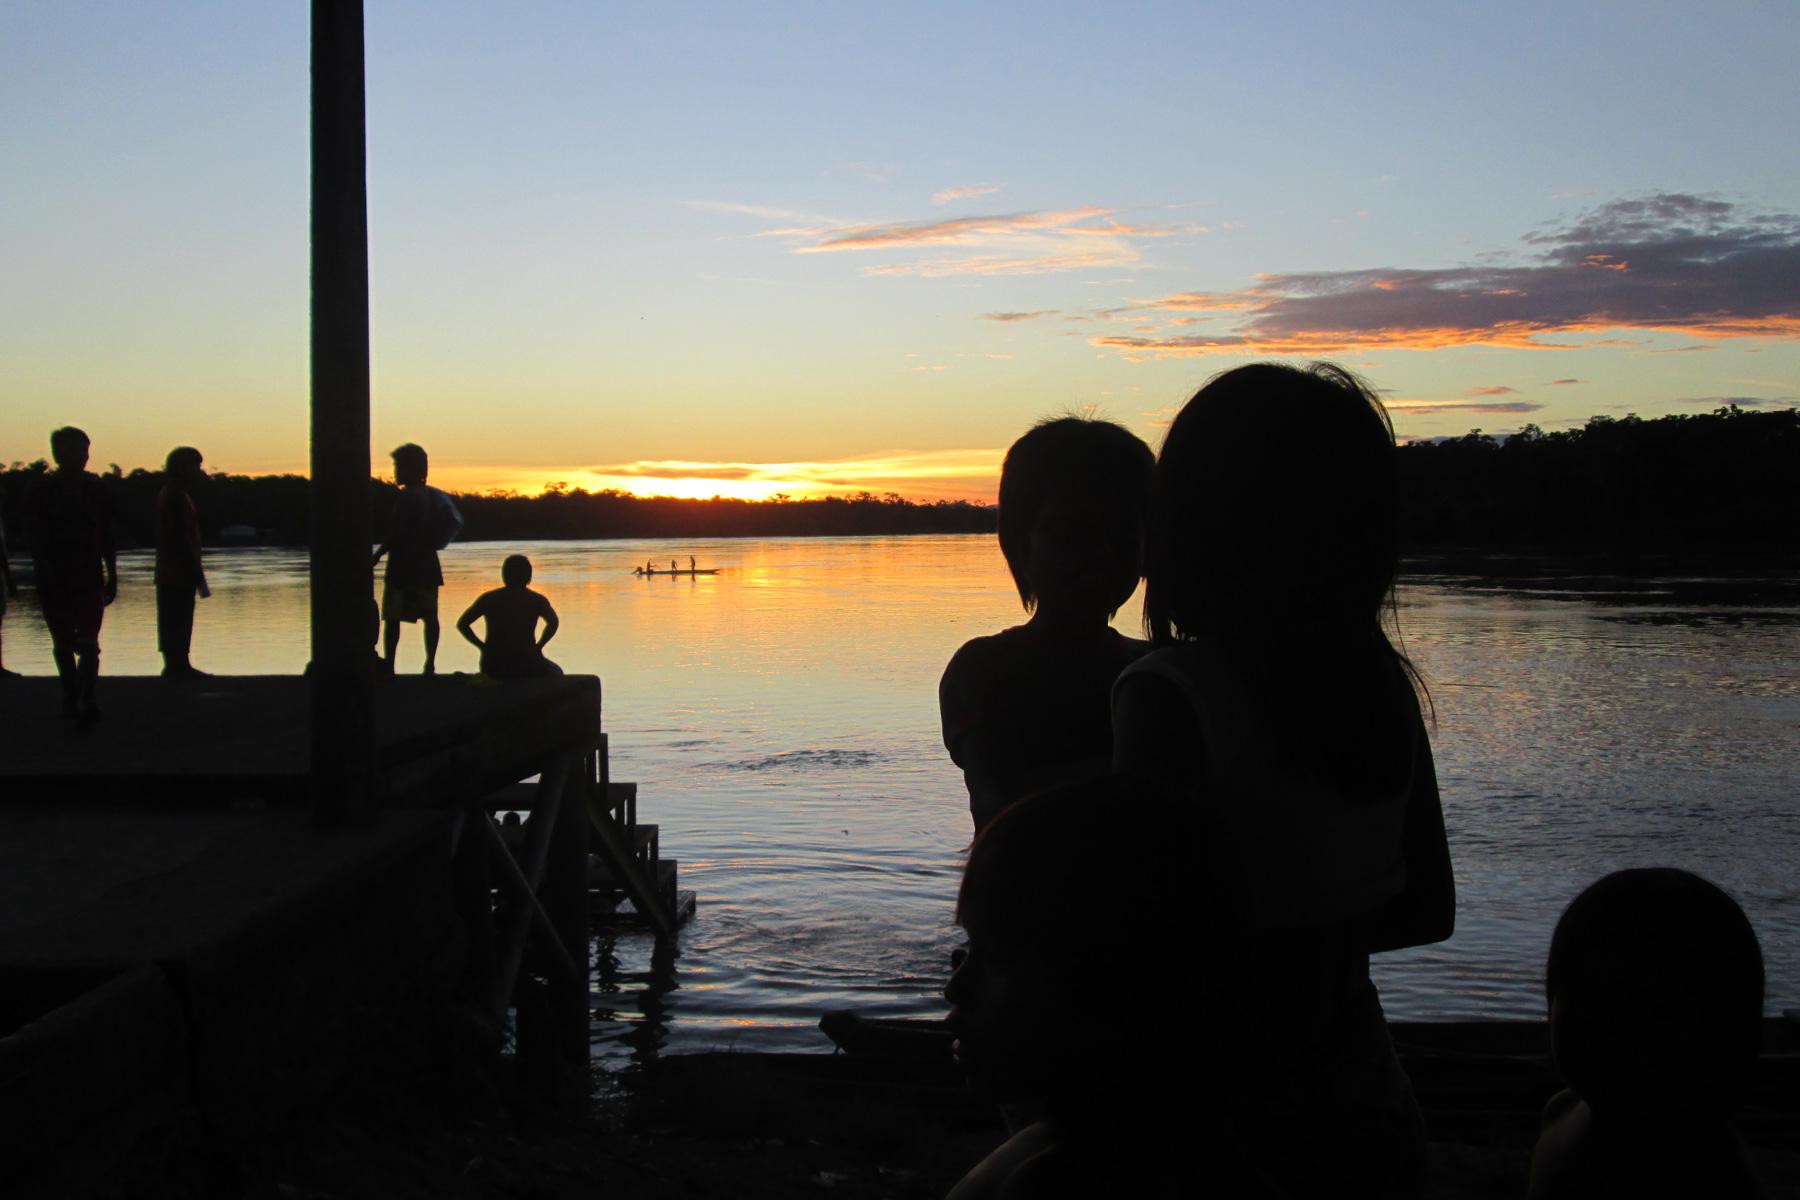 Children watch the sunrise at the Arauca river, Colombia. Photo: LWF